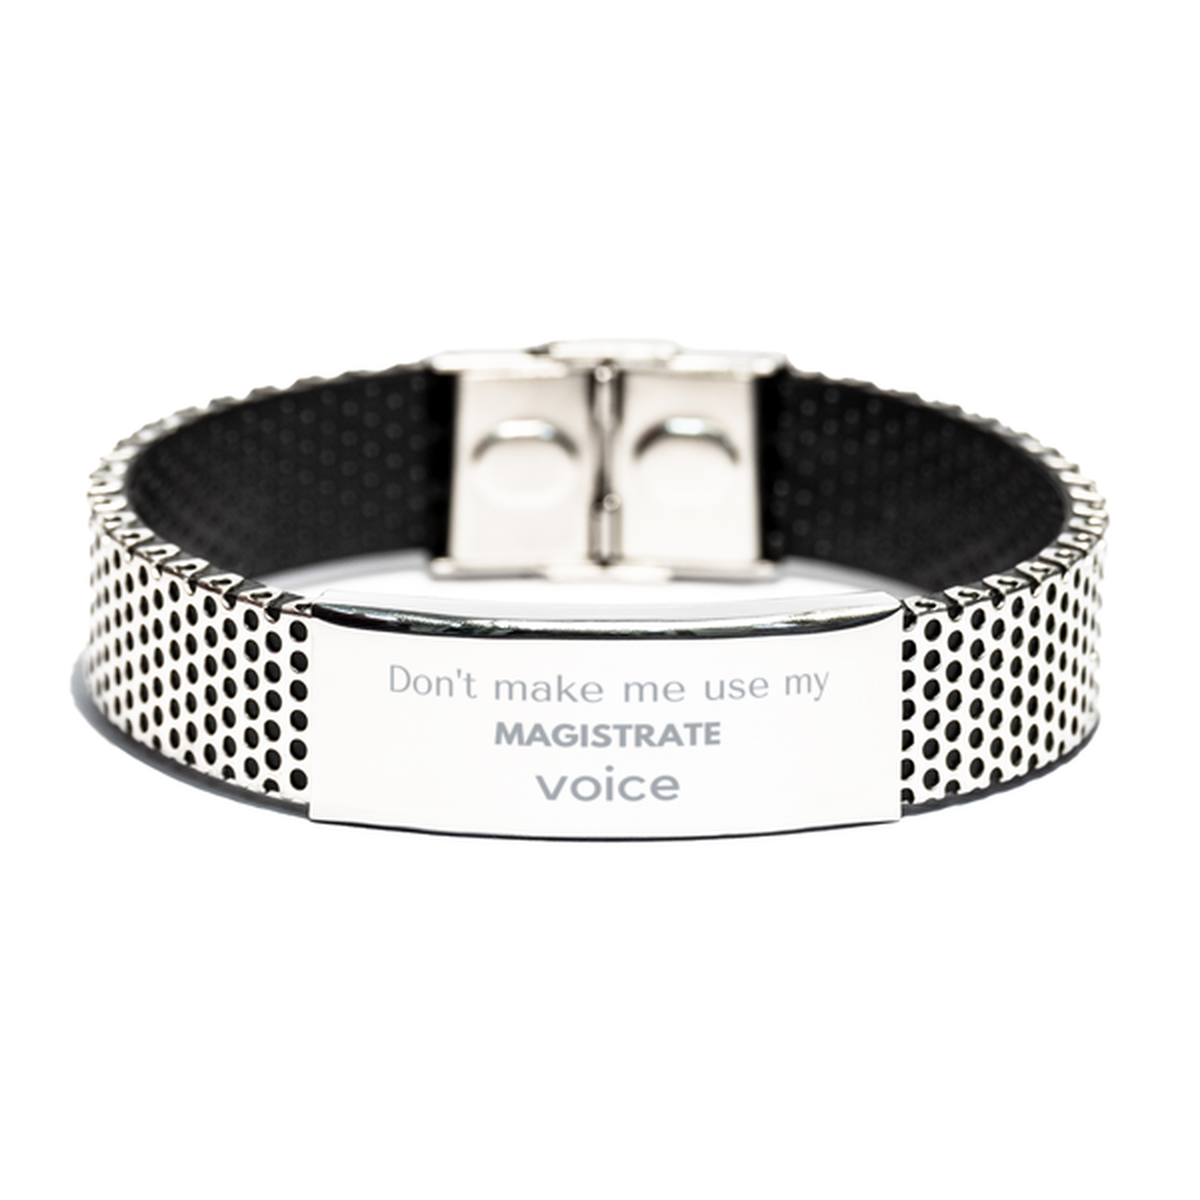 Don't make me use my Magistrate voice, Sarcasm Magistrate Gifts, Christmas Magistrate Stainless Steel Bracelet Birthday Unique Gifts For Magistrate Coworkers, Men, Women, Colleague, Friends